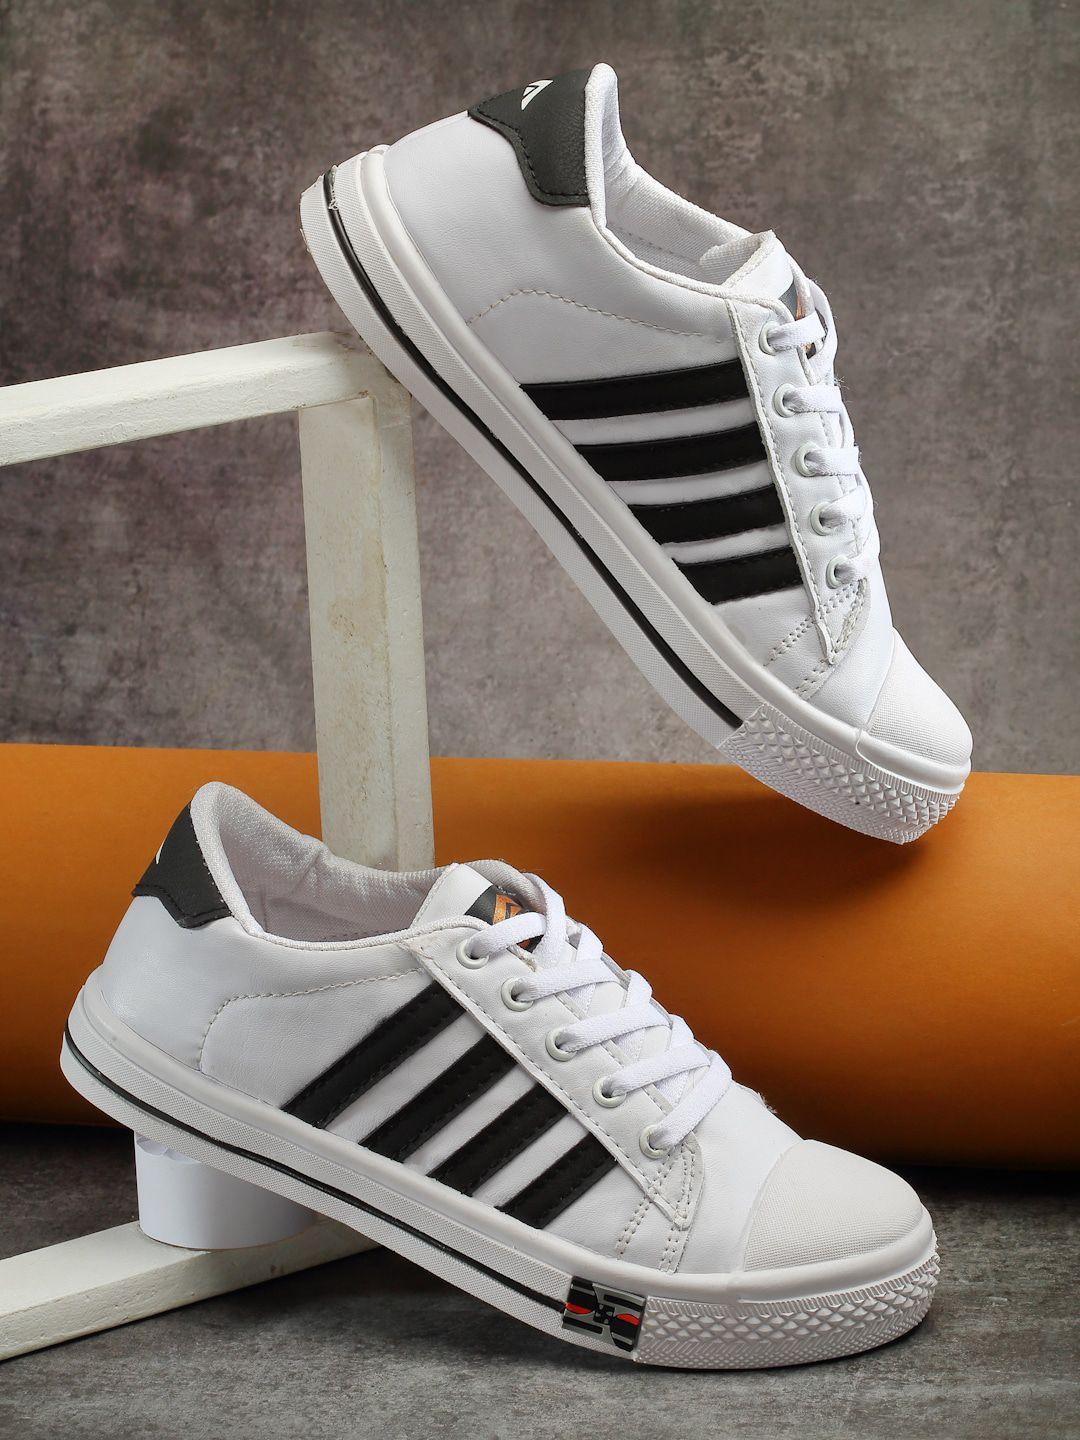 asian-women-striped-lace-up-sneakers